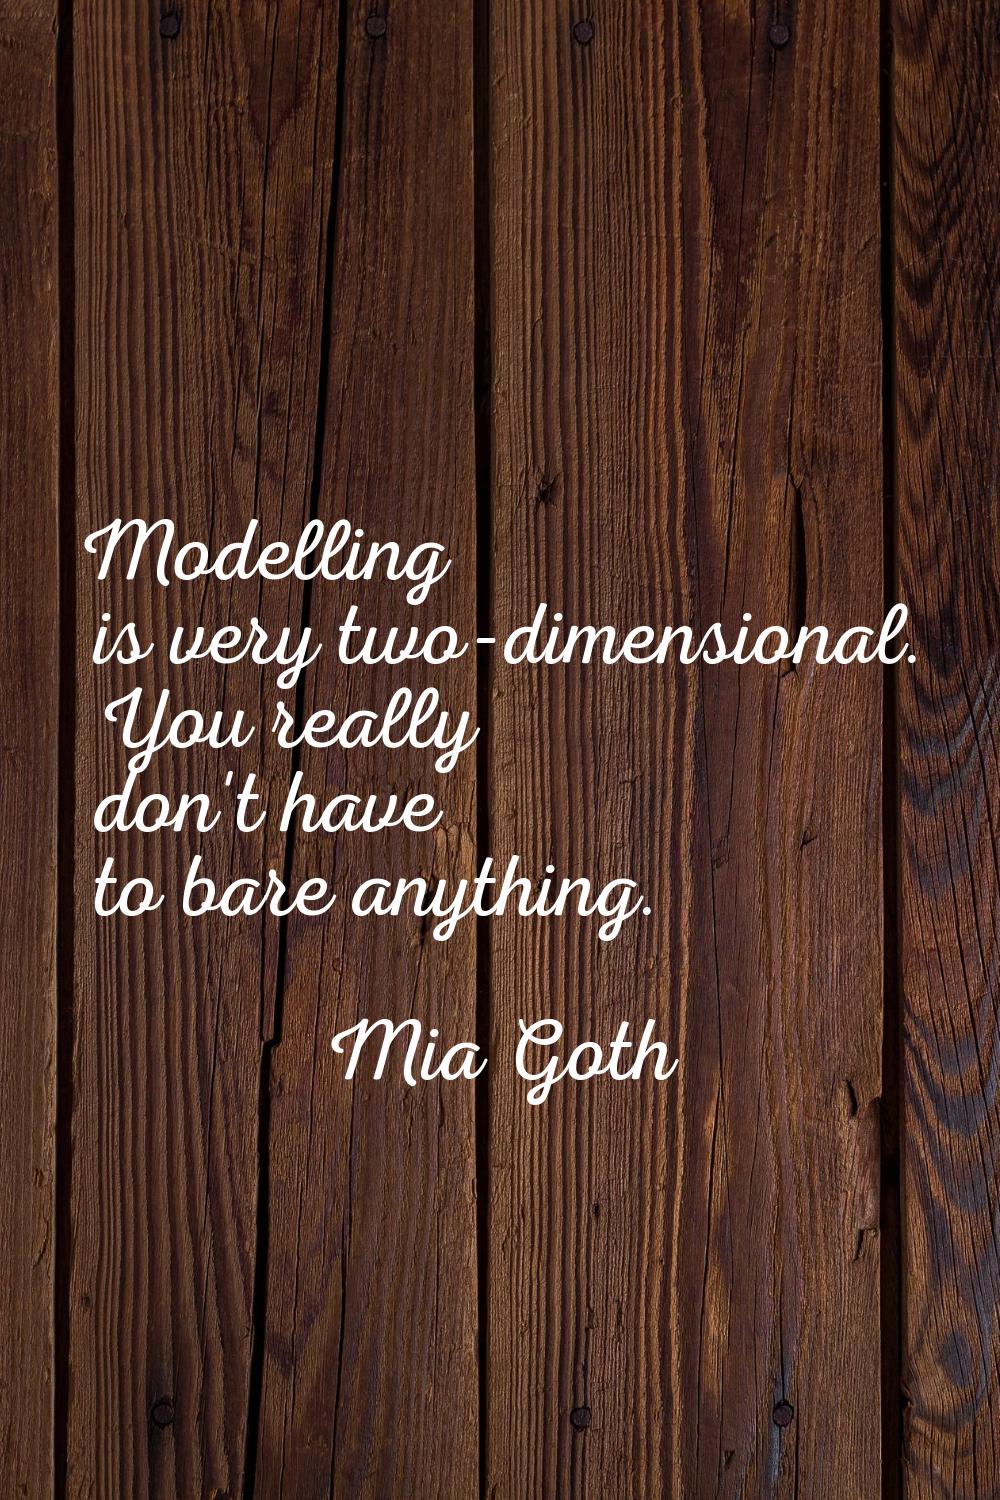 Modelling is very two-dimensional. You really don't have to bare anything.